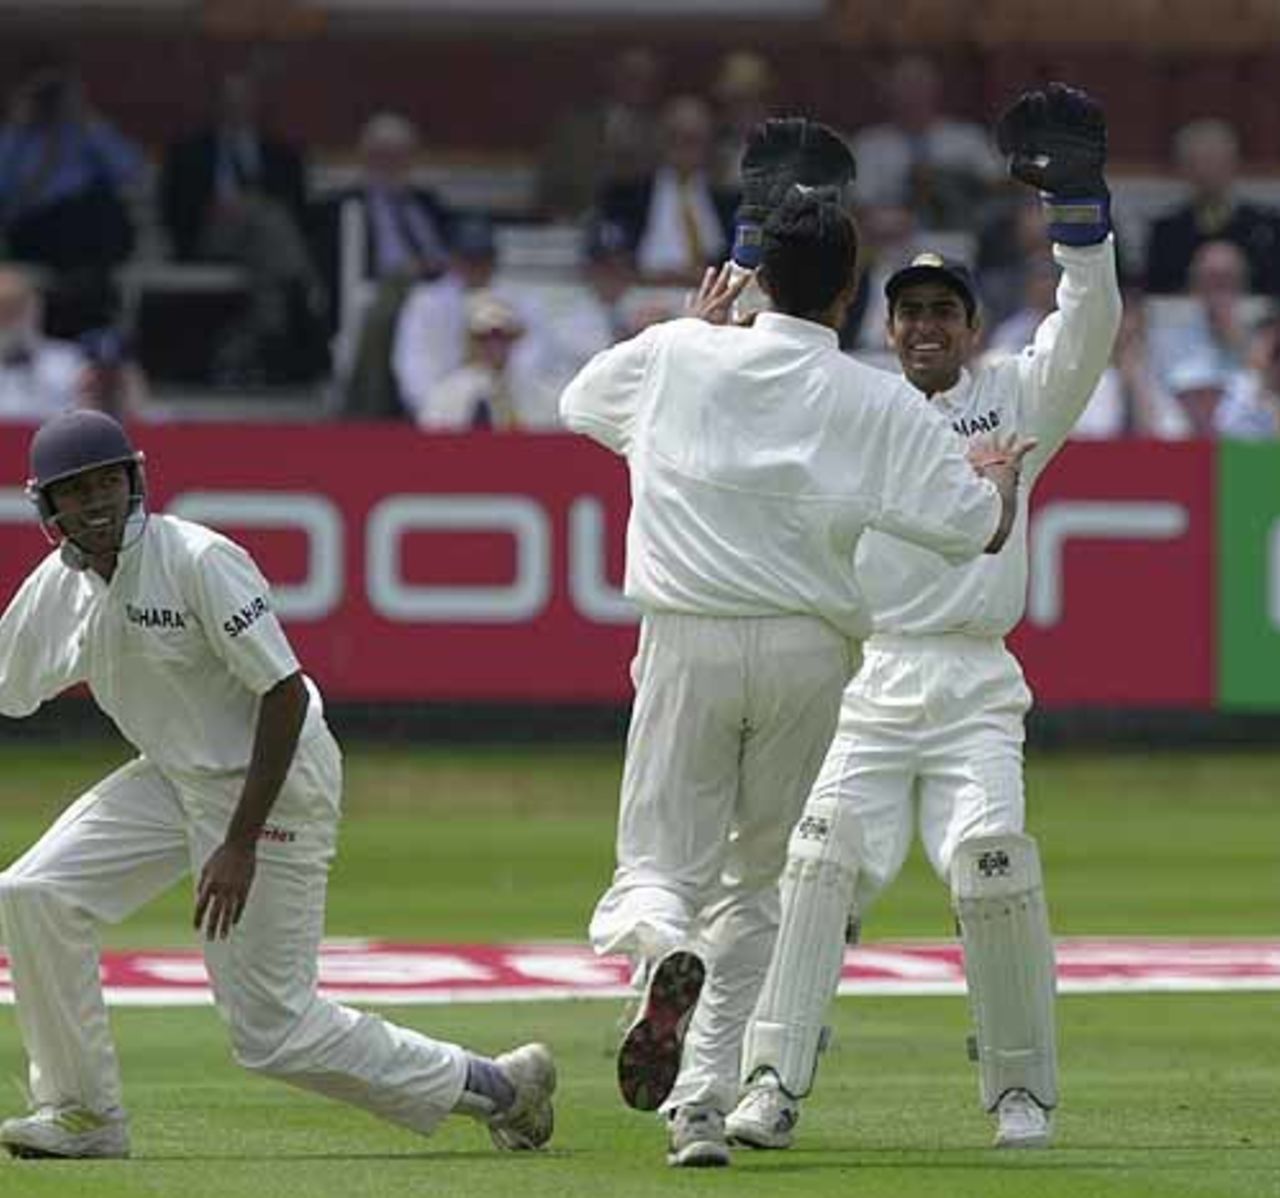 Ratra and Kumble celebrate the wicket of Butcher in the England first innings, England v India, 1st npower Test at Lord's